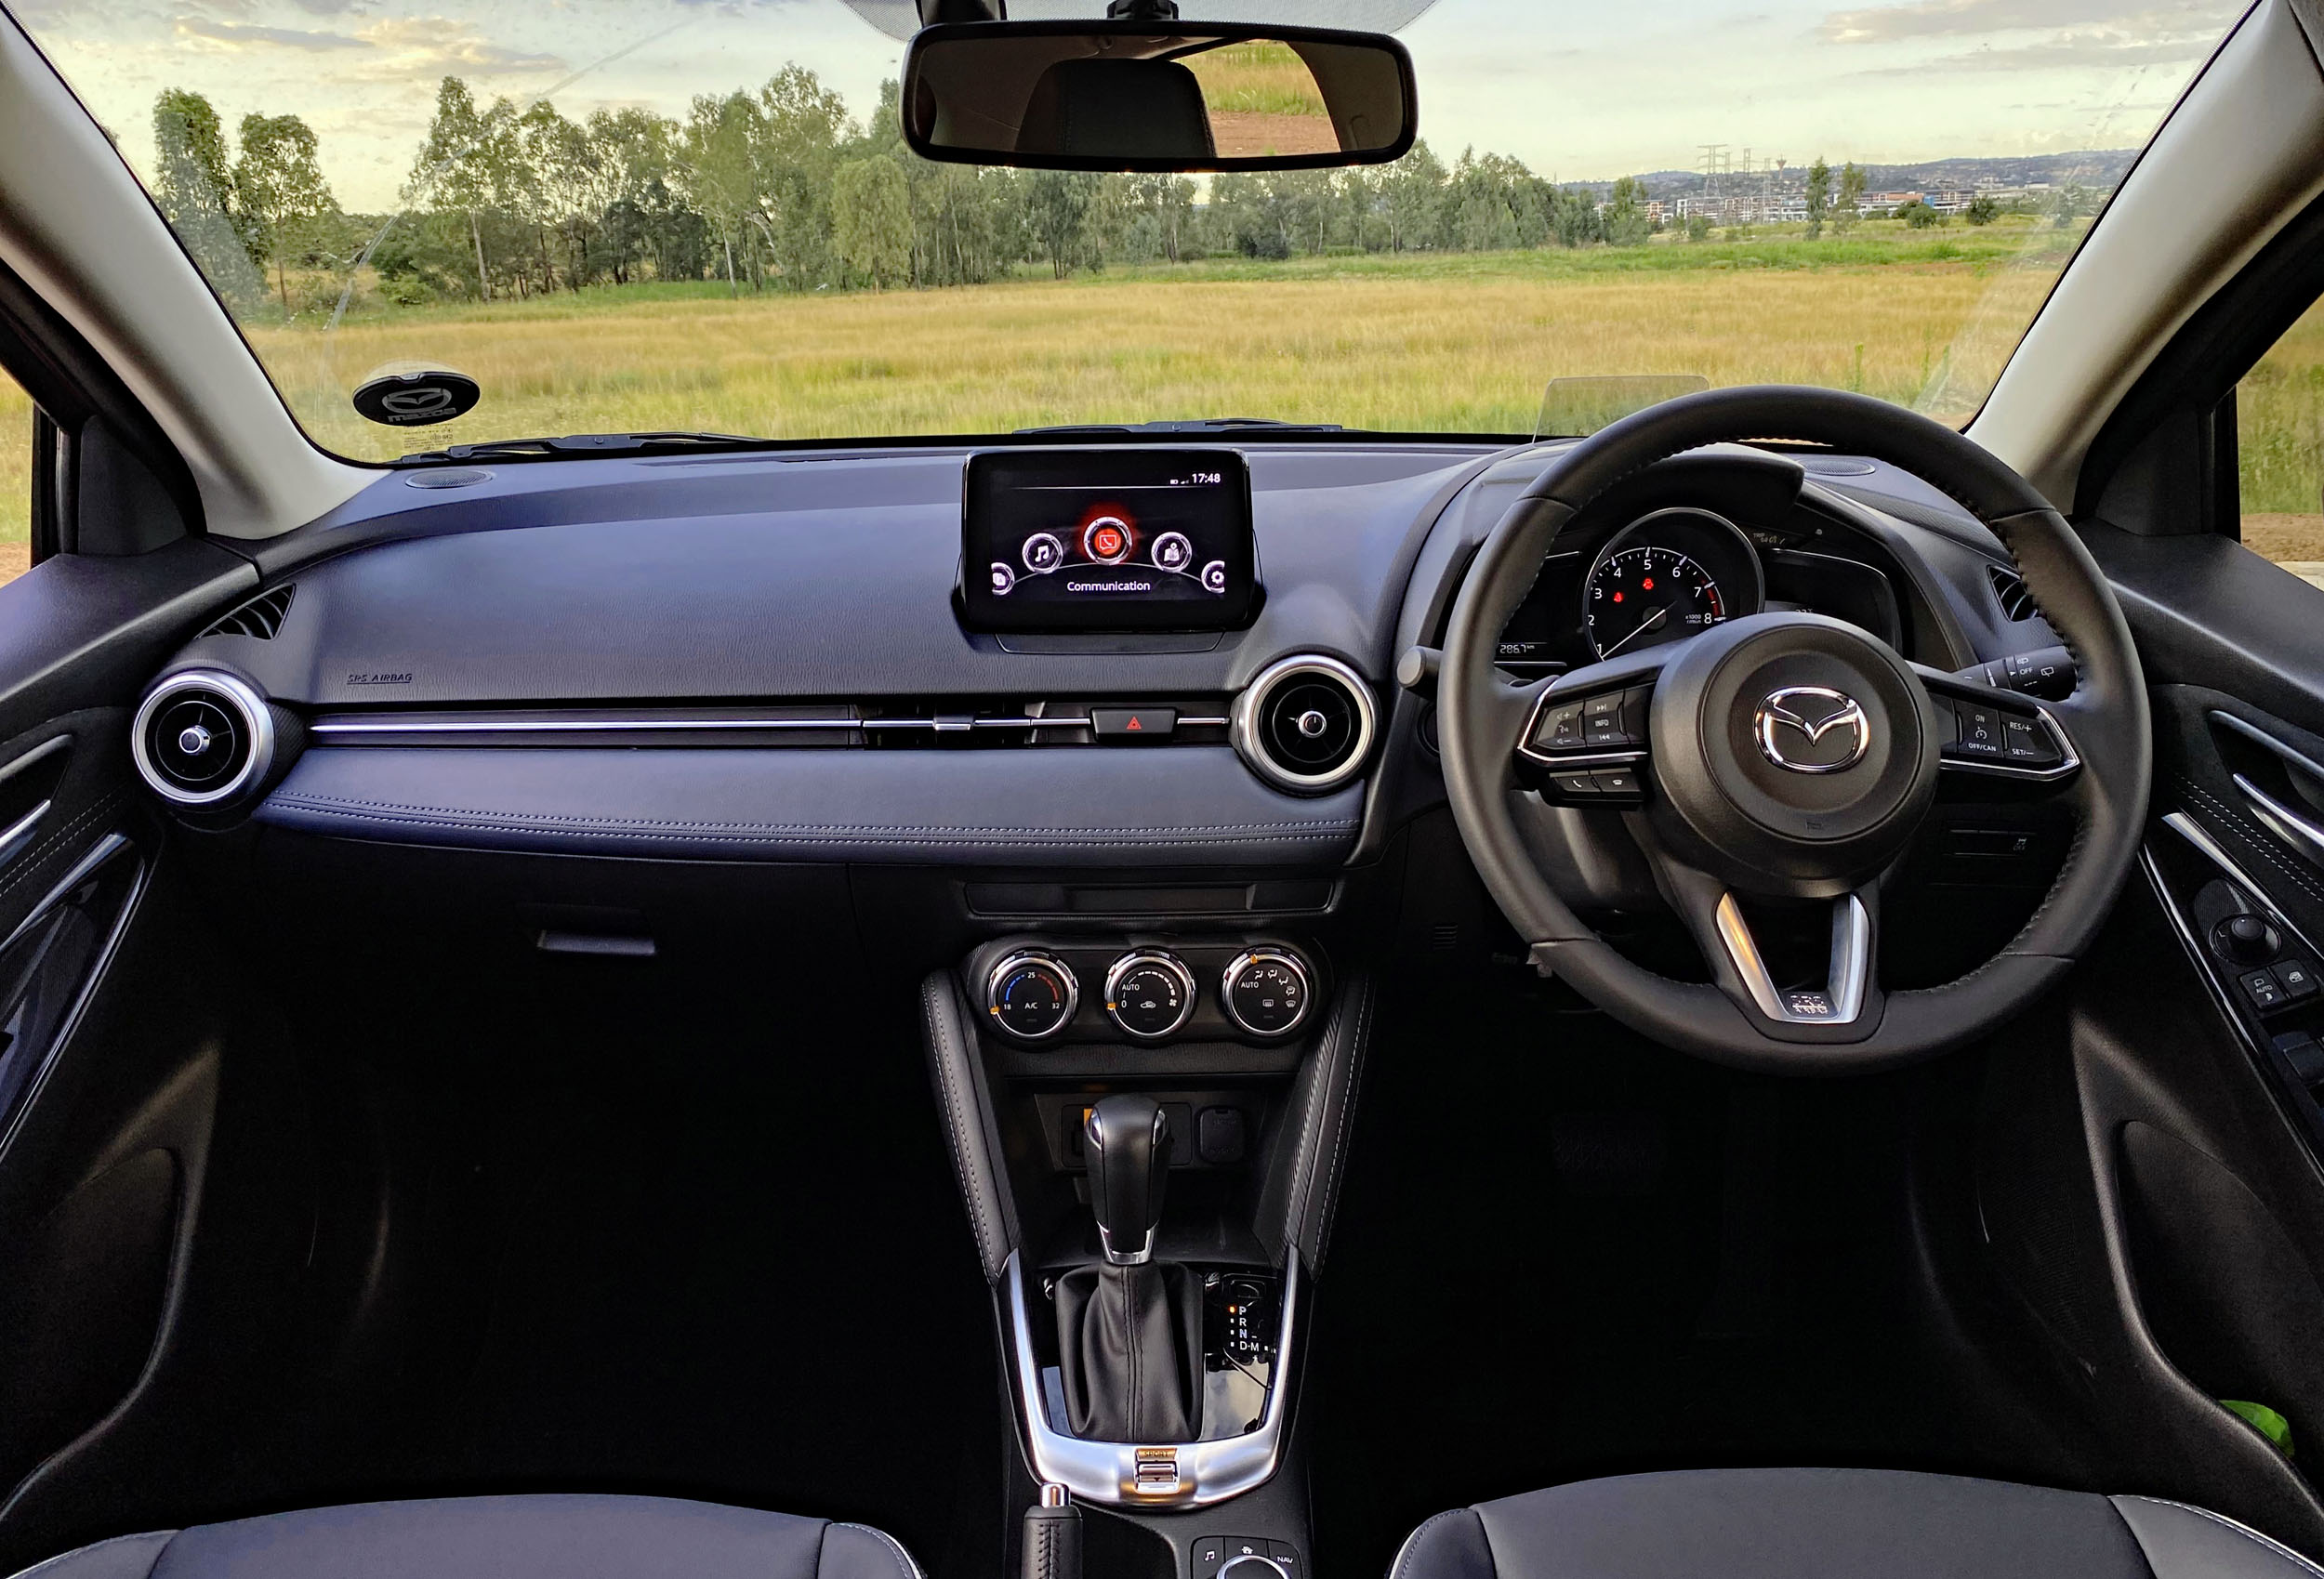 mazda, mazda 2, mazda 2 review – built to get your money’s worth